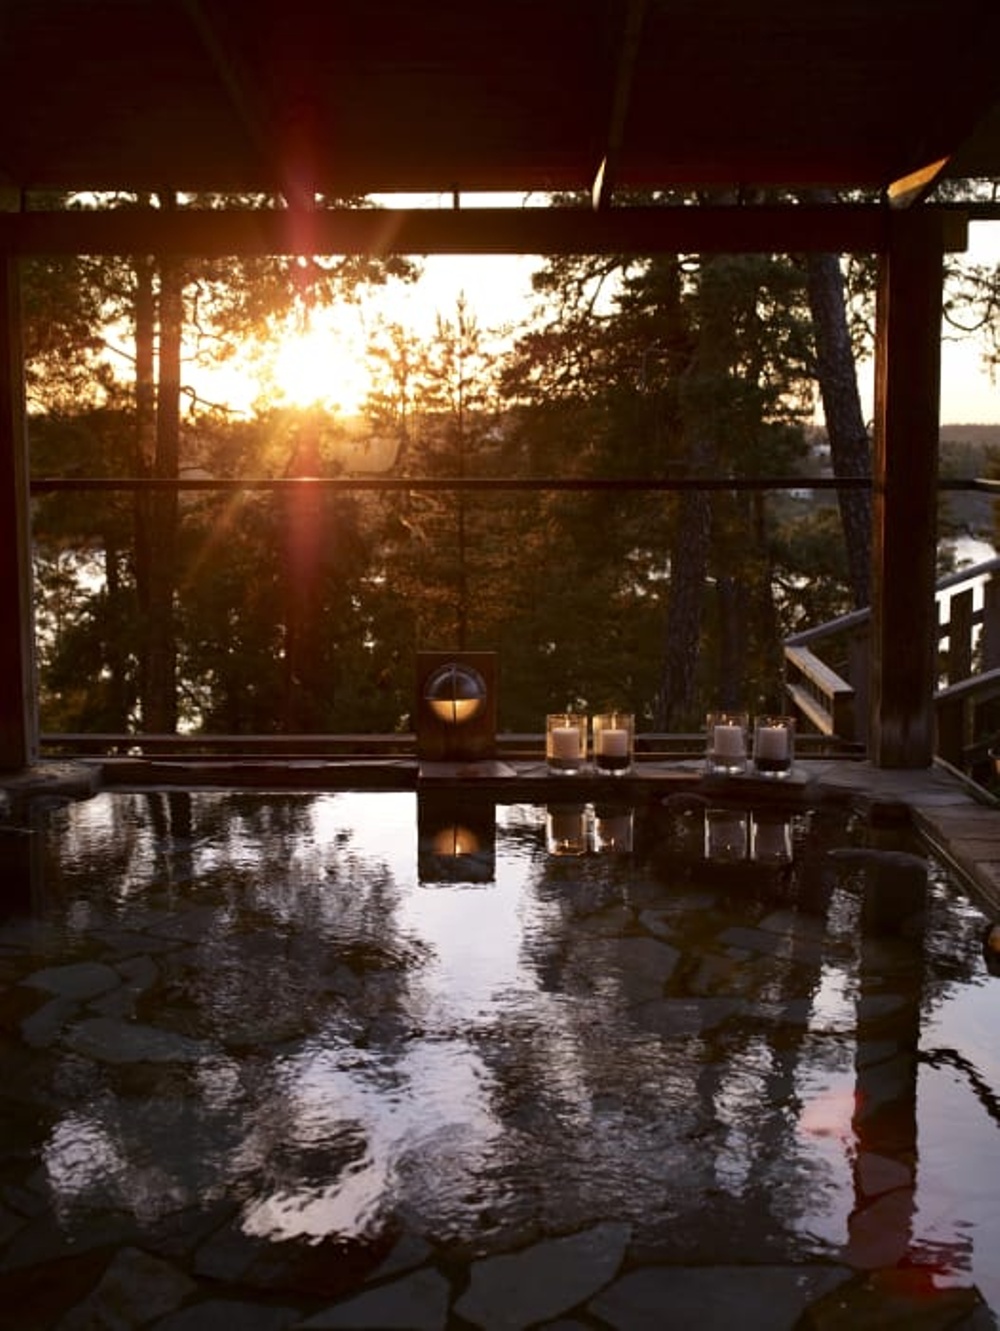 A summer sunset and a Japanese hot water bath with surrounding soft candlelights.